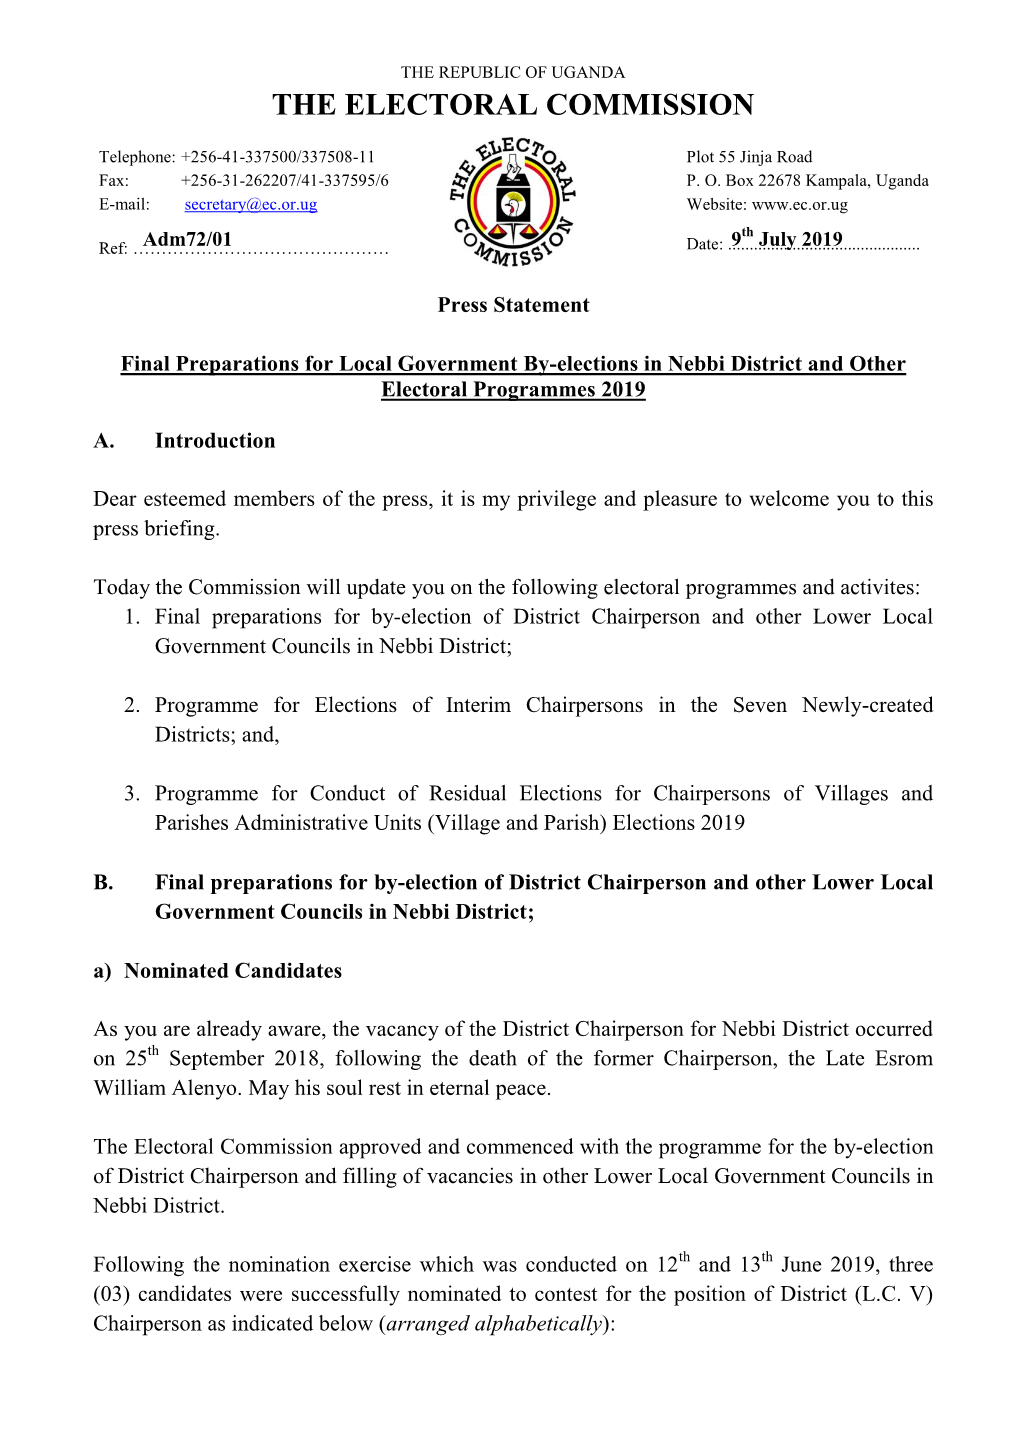 Press Statement on Nebbi Local Government By-Elections and Other